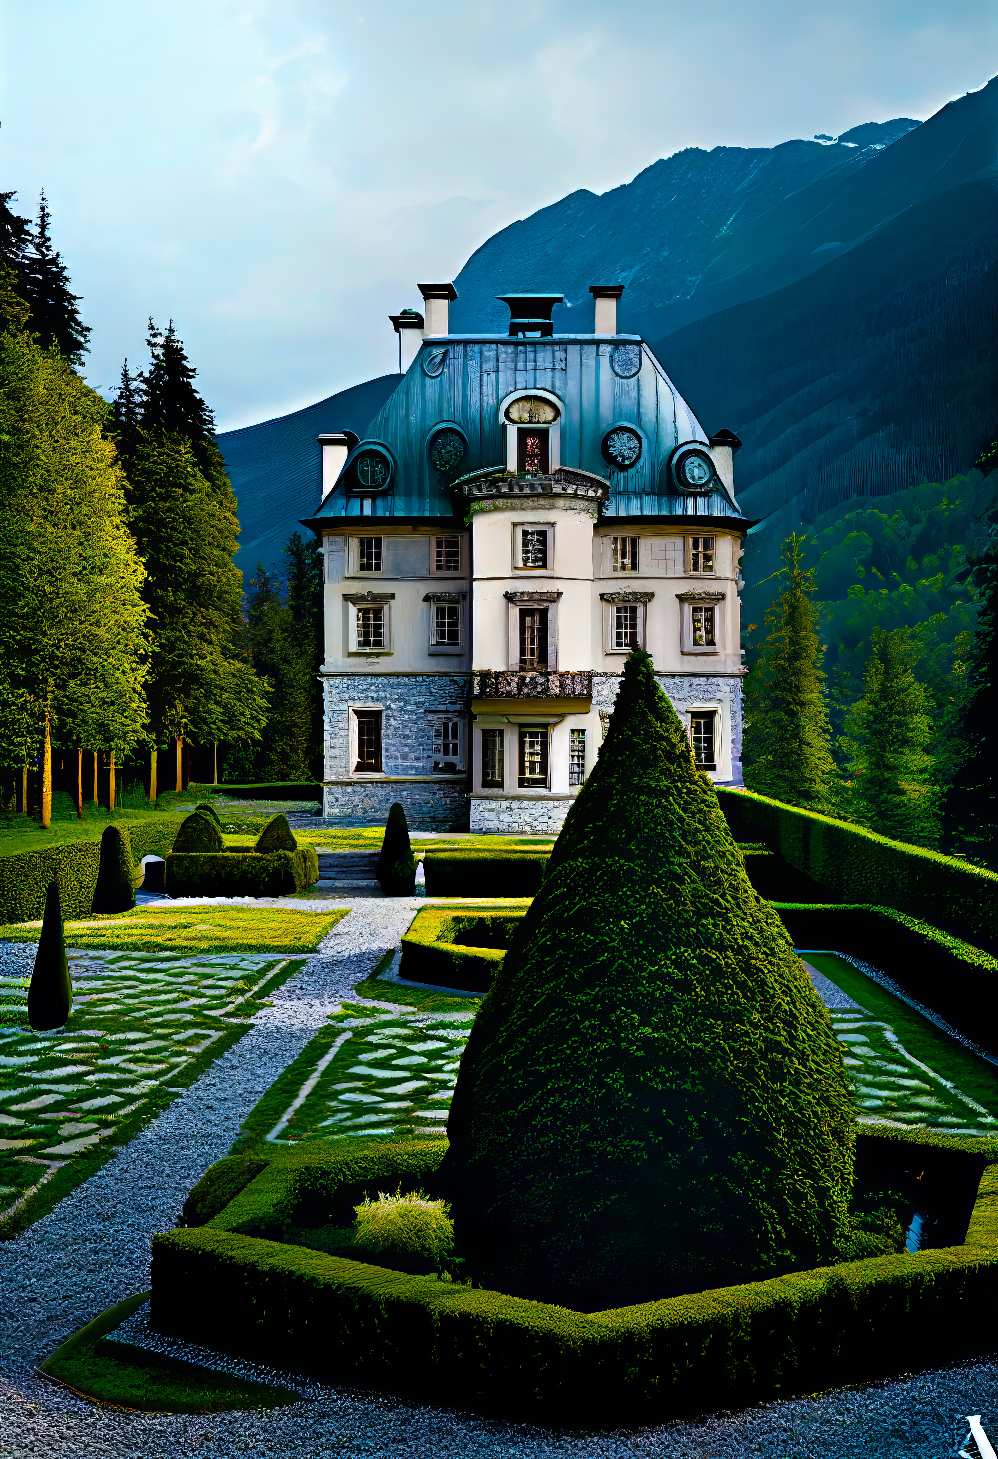 Modern Manor House in the Mountains with Topiary Gardens